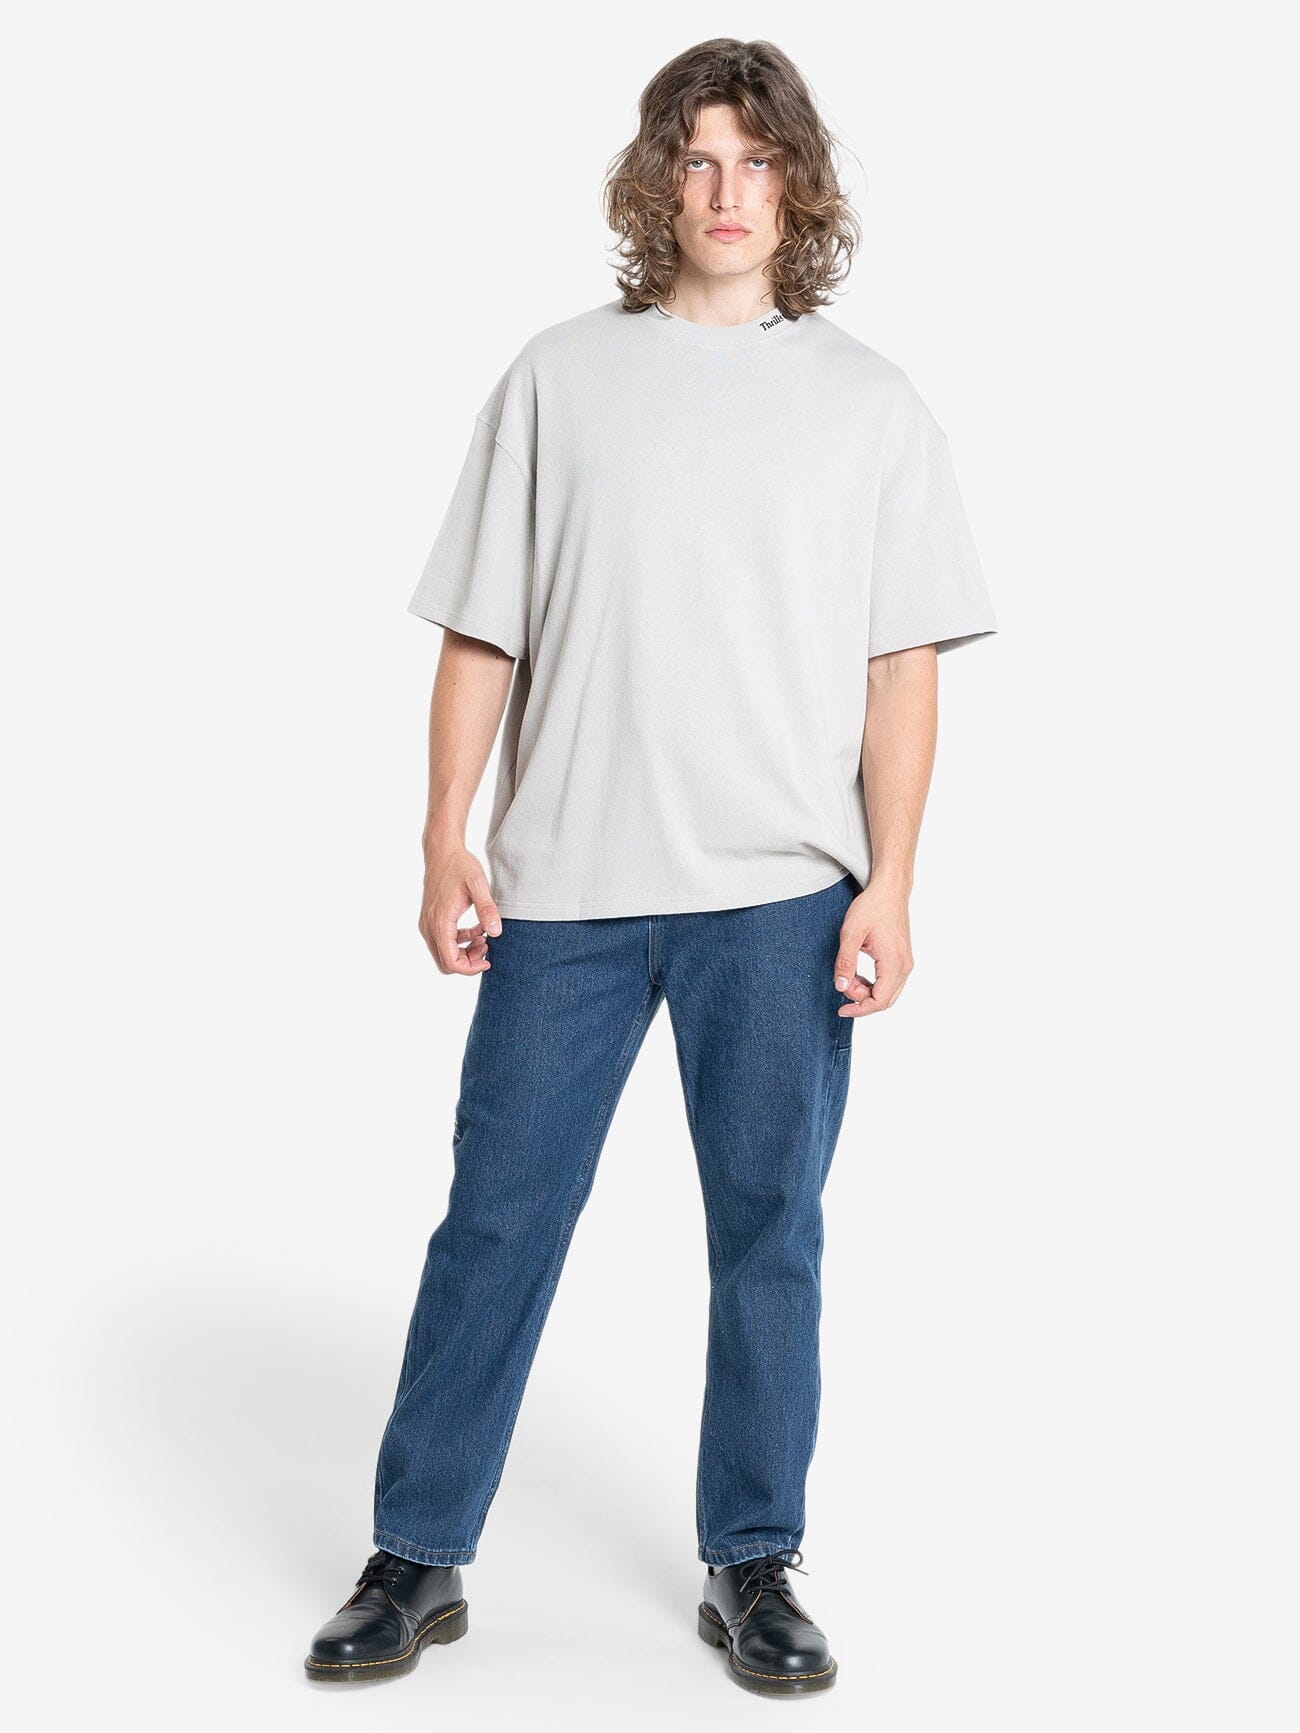 Cortex Box Fit Oversize Tee - Oyster Grey XS